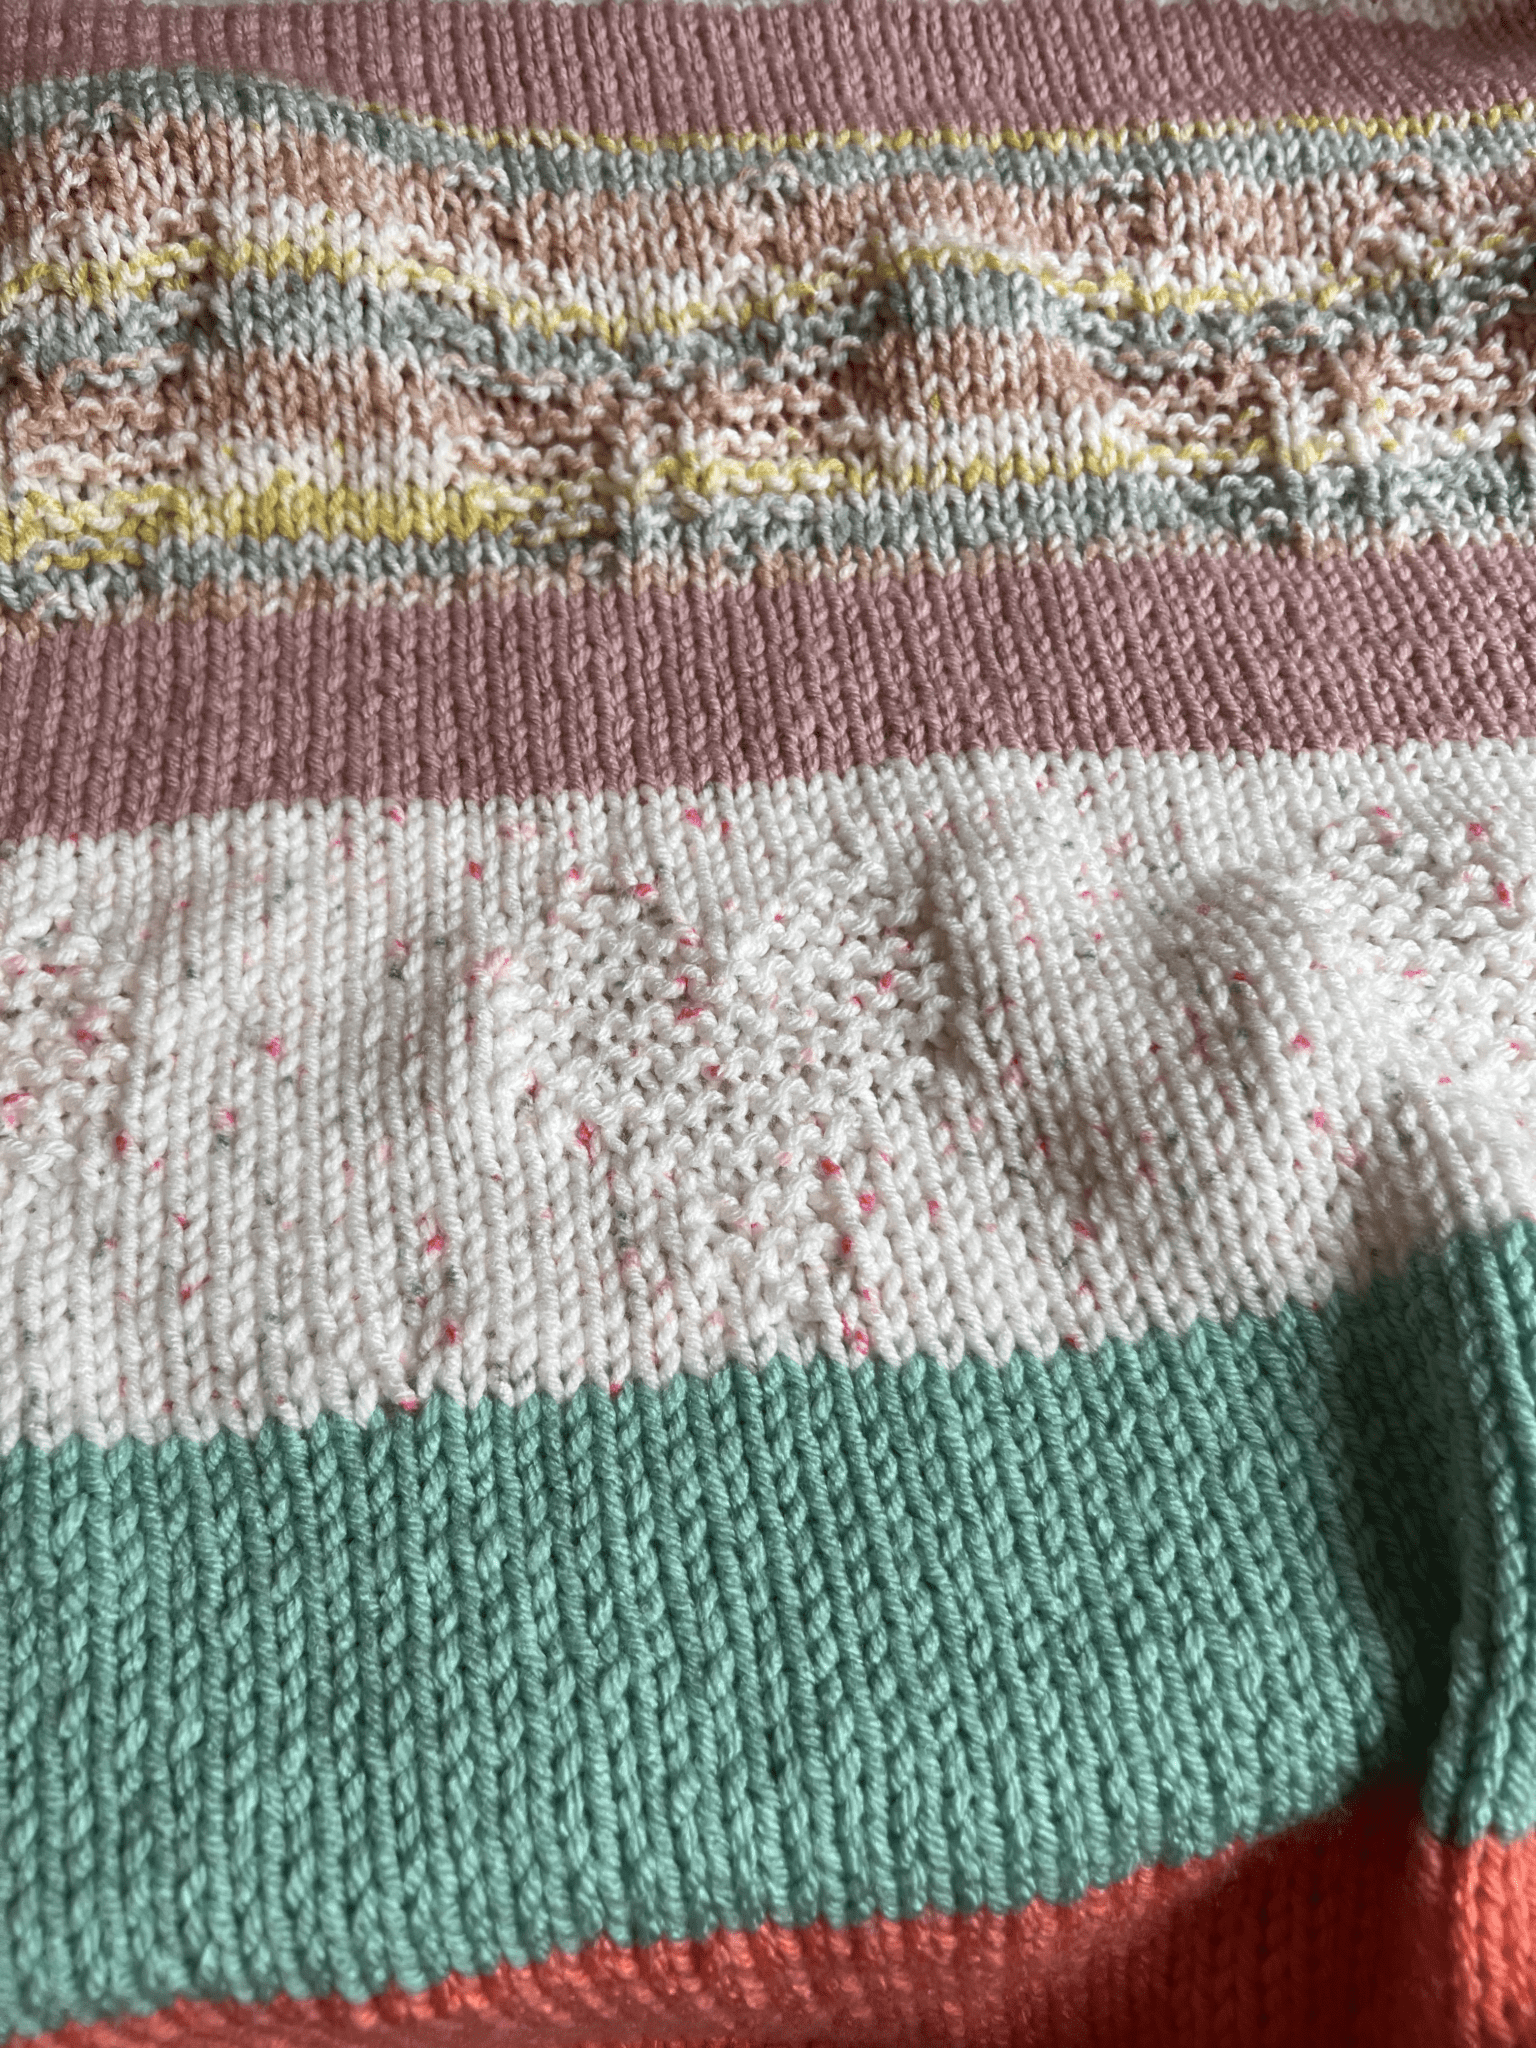 Knitting the Those Summer Days Baby Blanket | candyloucreations